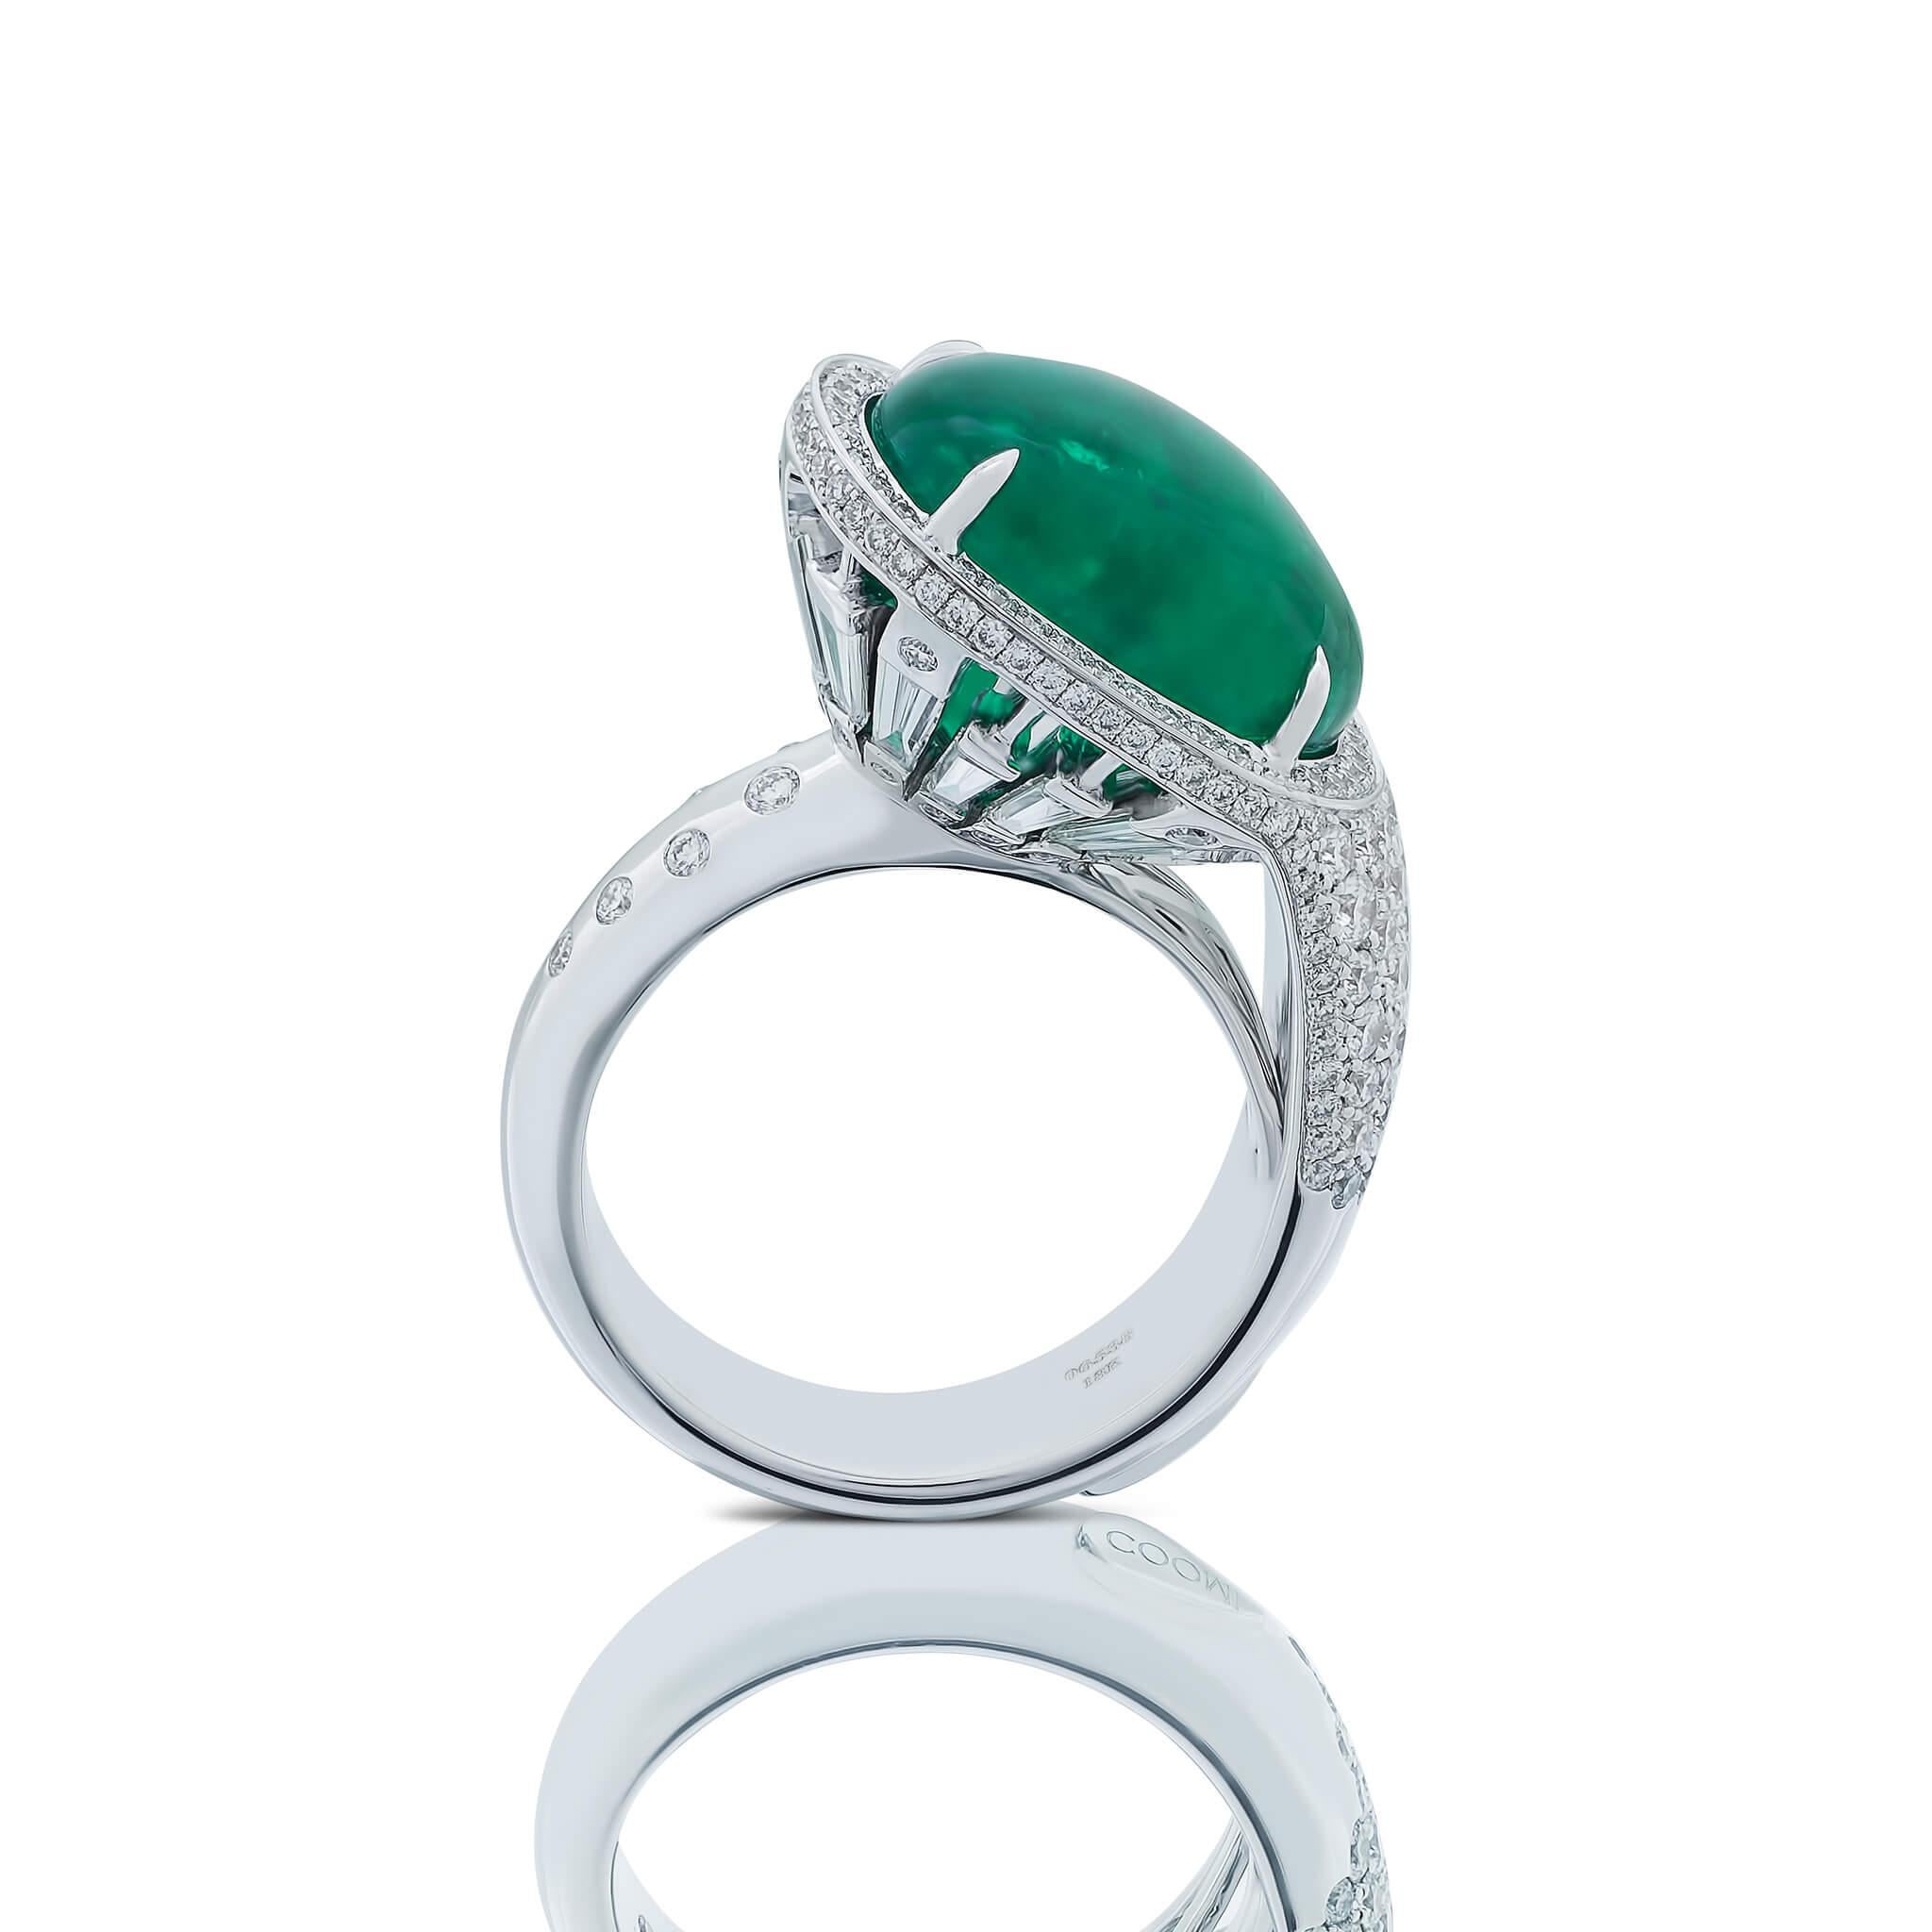 Coomi Trinity collection 18K white gold cockail ring with 8.66cts emerald and 2.35cts diamonds.